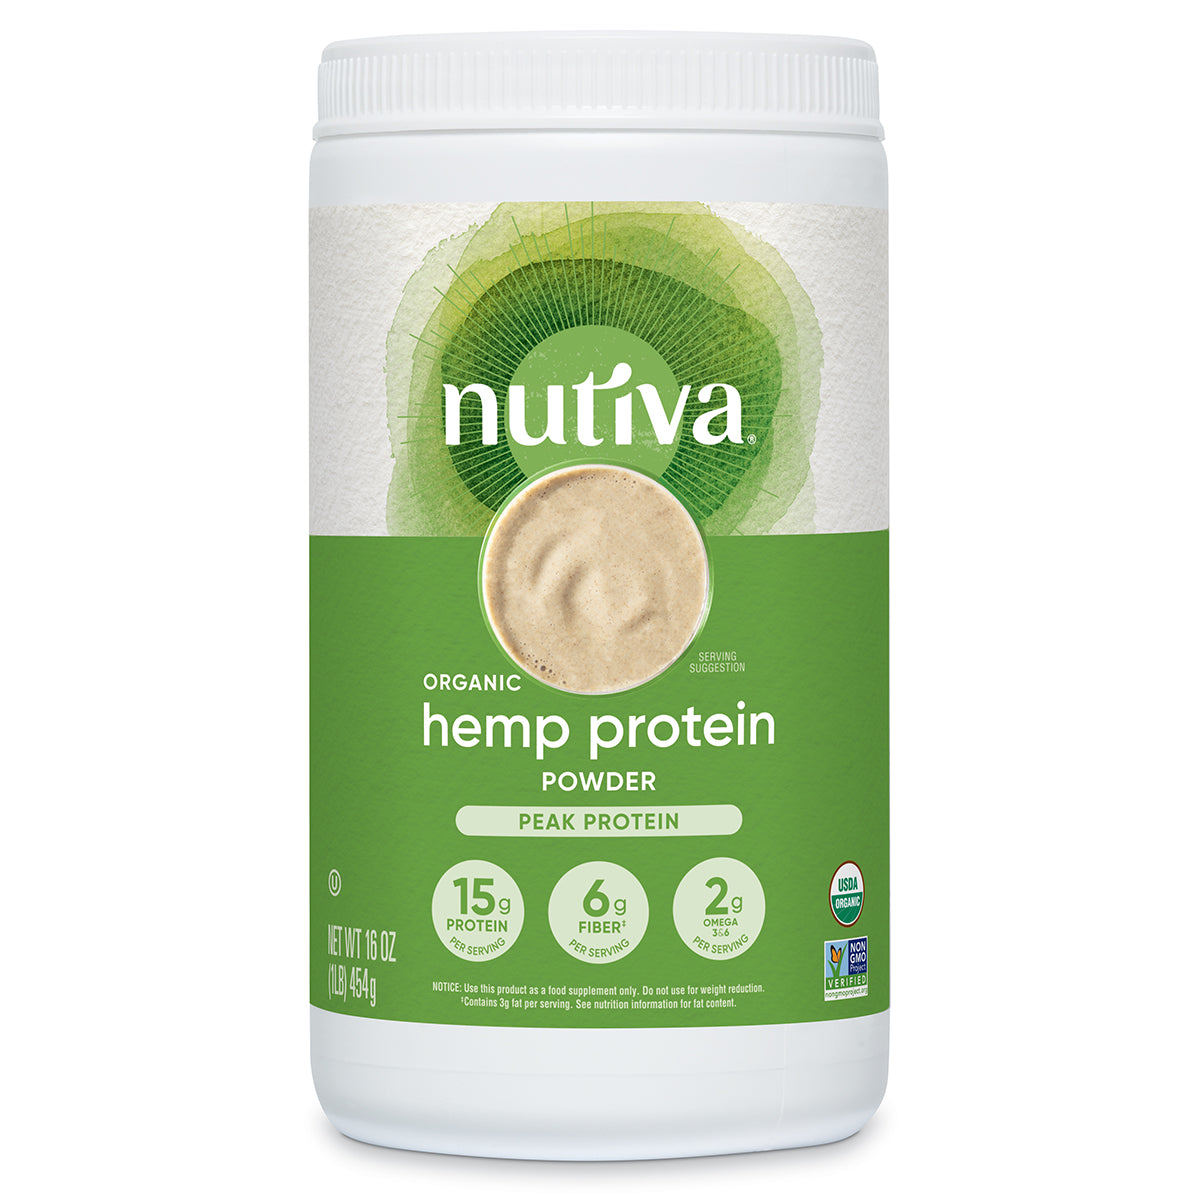  Nutiva Organic Shelled Hemp Seed, 19 Ounce, USDA Organic,  Non-GMO, Non-BPA, Whole 30 Approved, Vegan, Gluten-Free & Keto, 10g Plant  Protein and 12g Omegas per Serving for Salads, Smoothies & More 